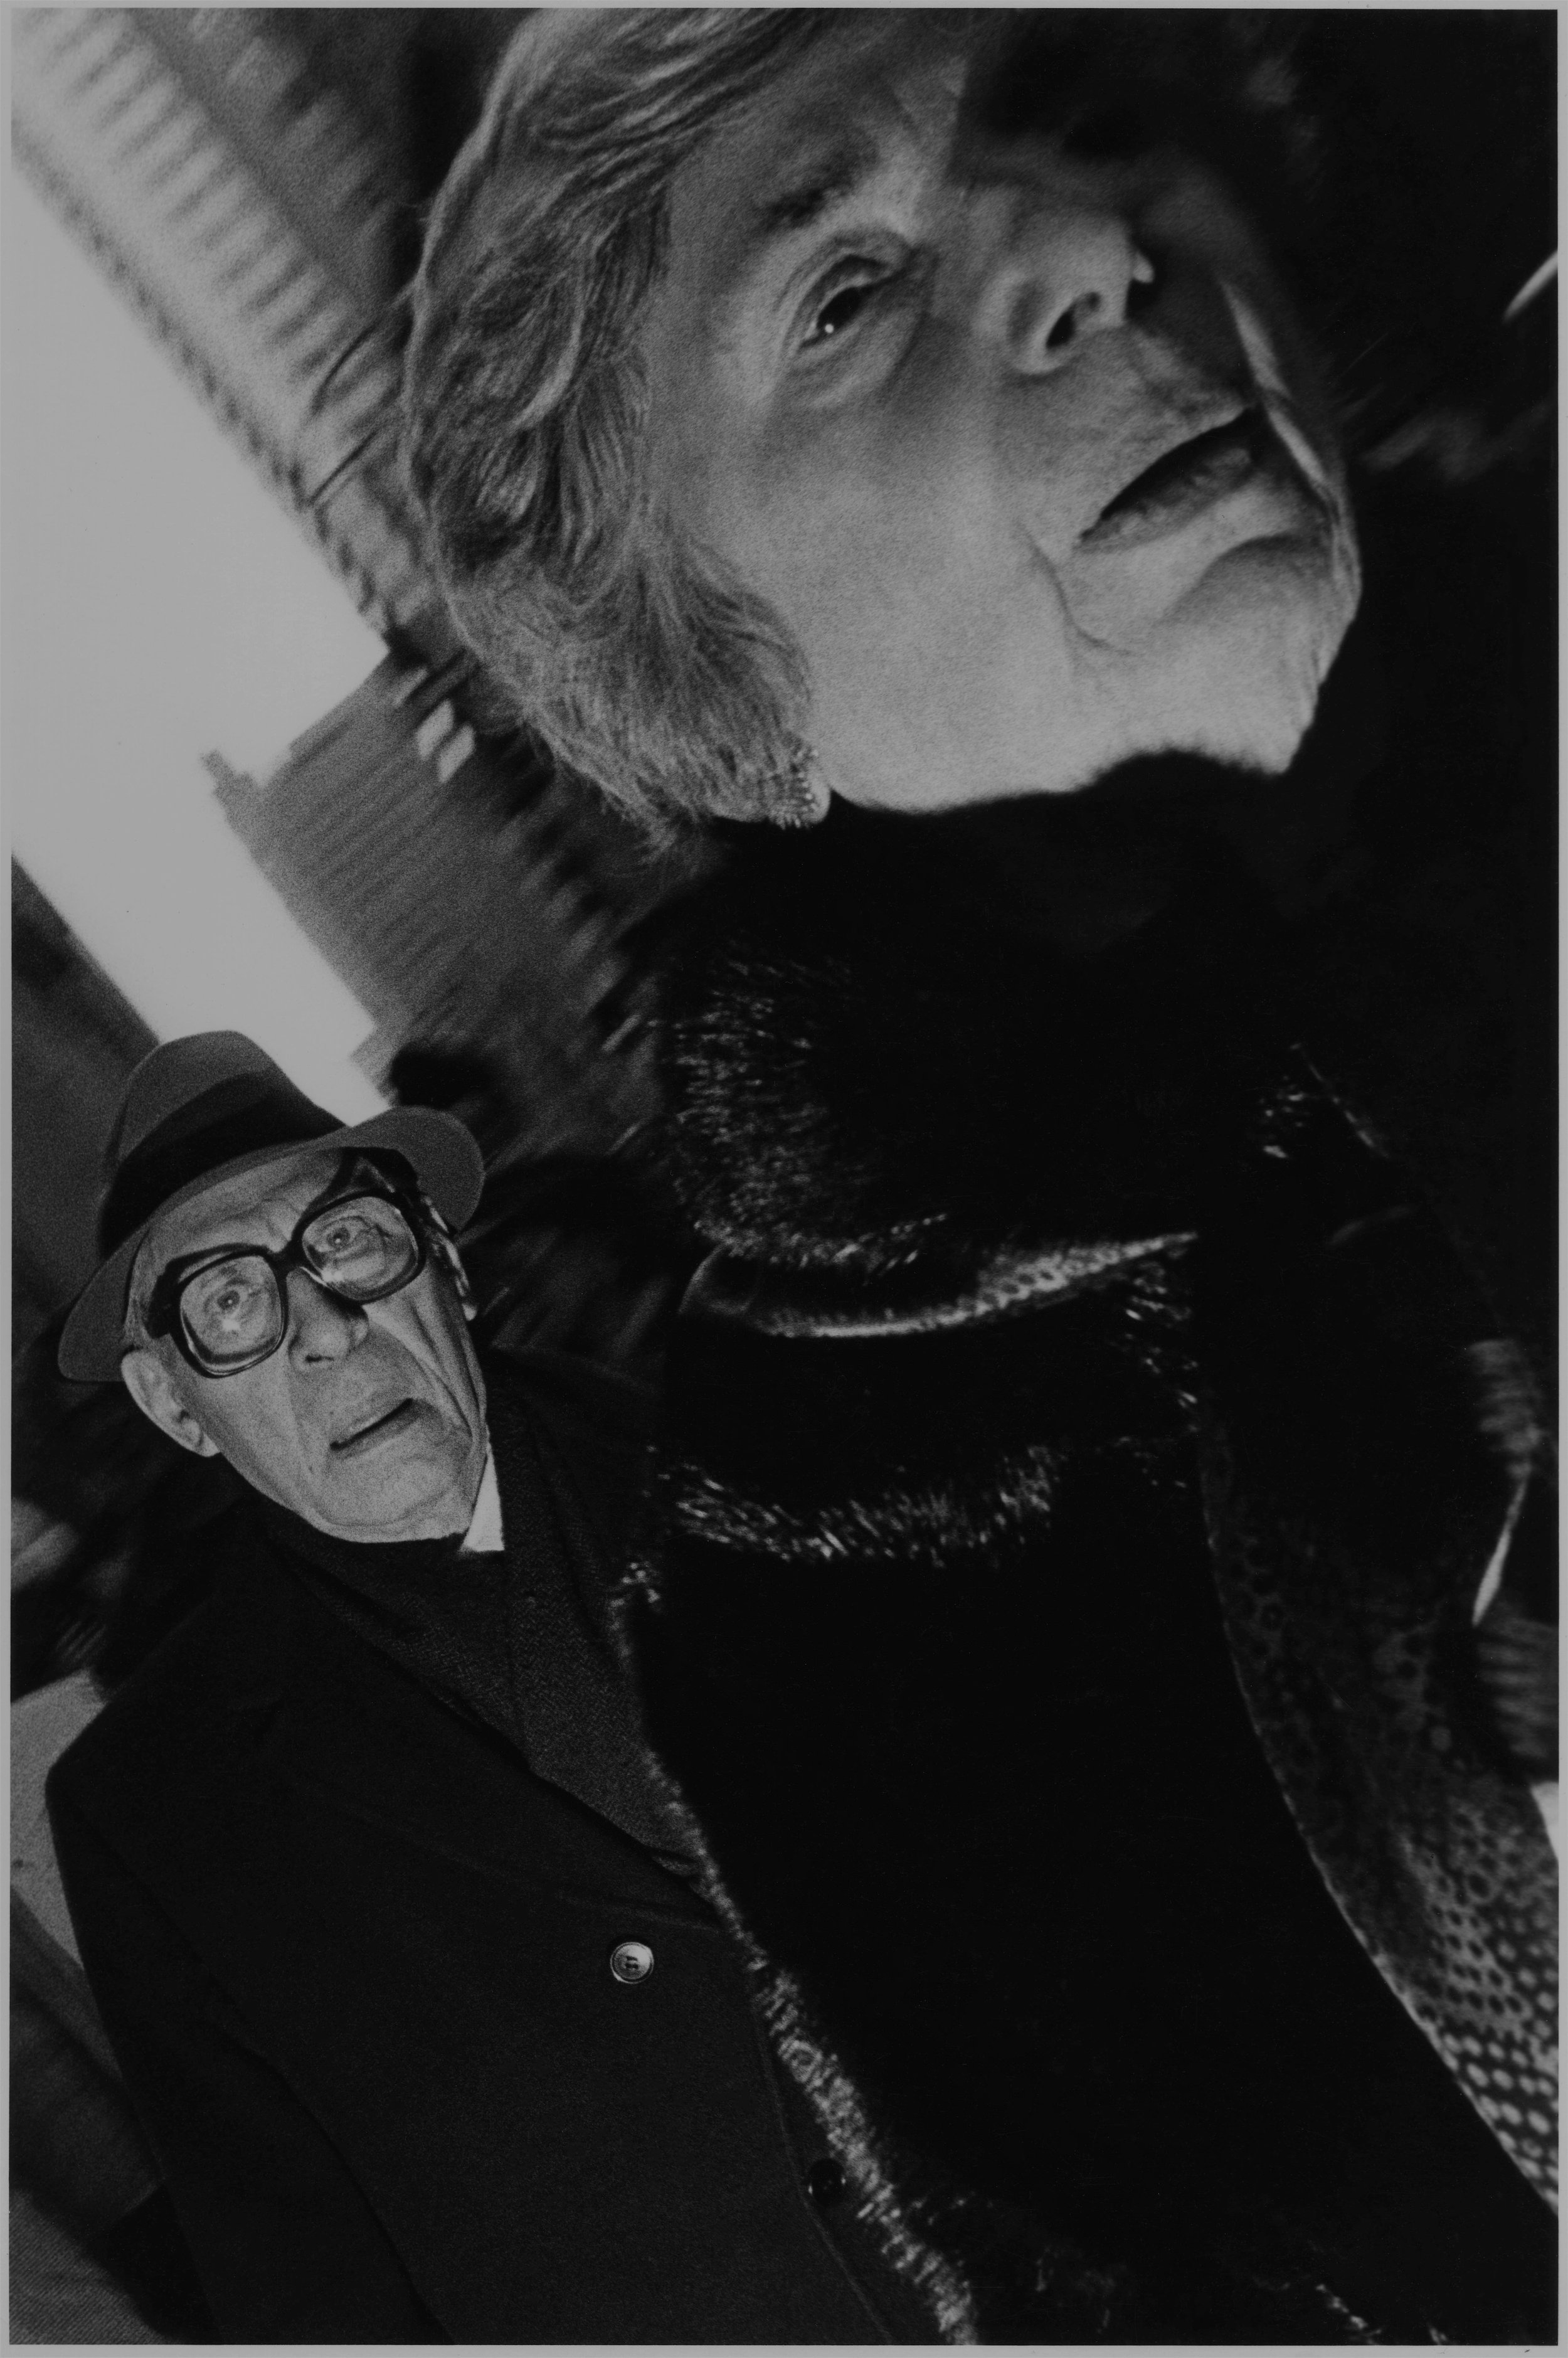 henry miller lookalike on 5th &amp; 57th., nyc, c. 1985